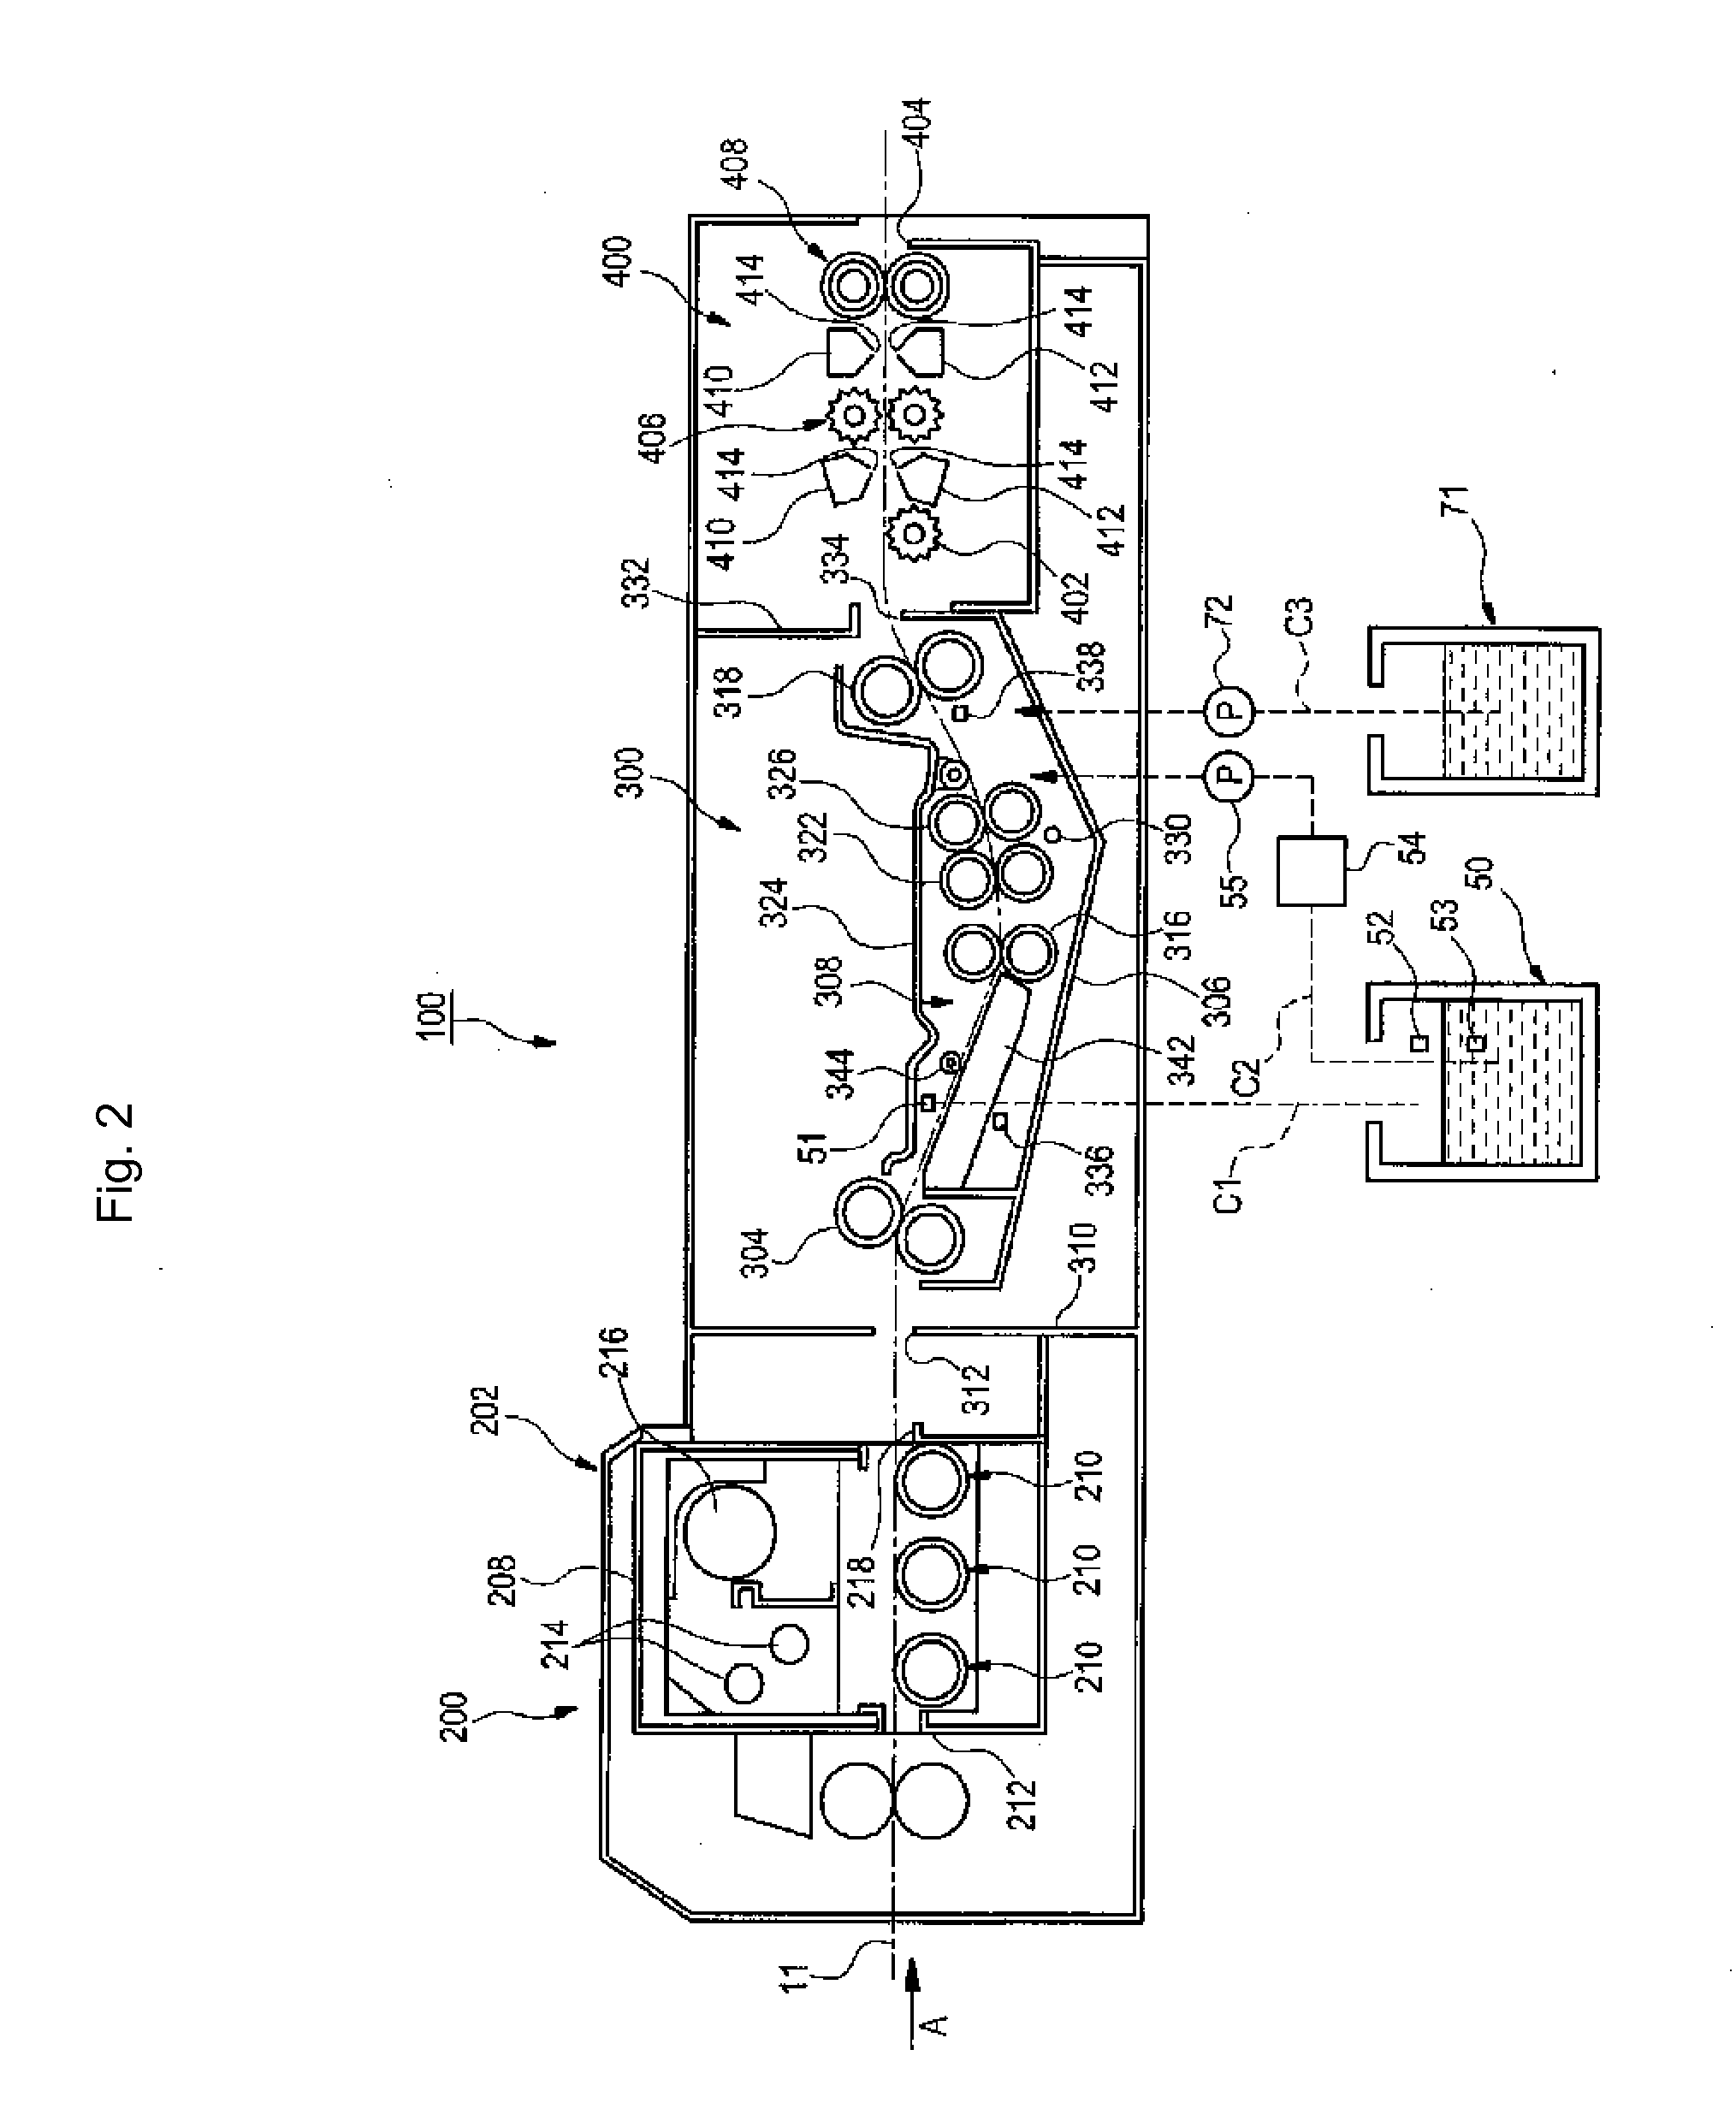 Lithographic printing plate precursors and processes for preparing lithographic printing plates